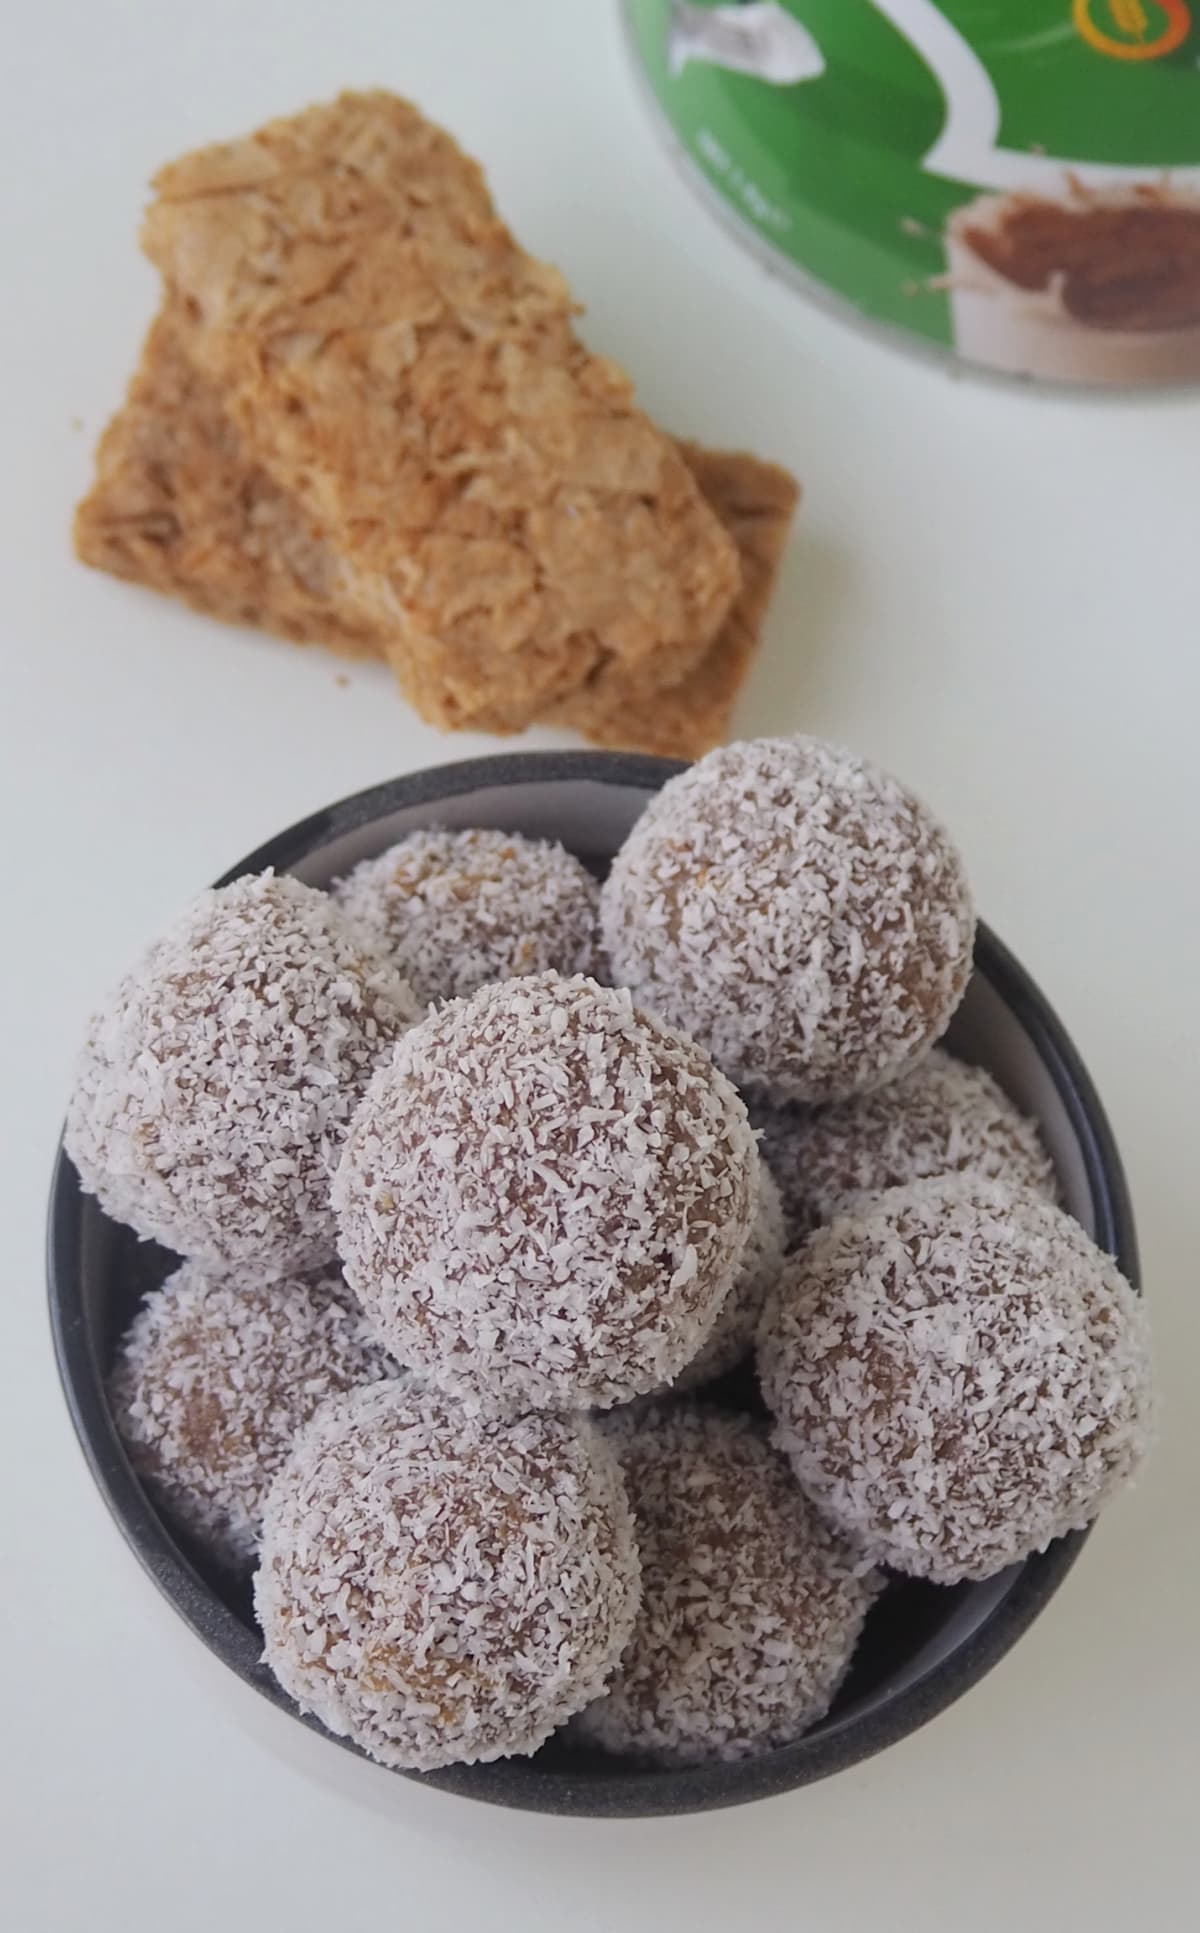 Overhead view of a bowl of Weet-Bix and Milo Balls with a bar of weet-bix in background.